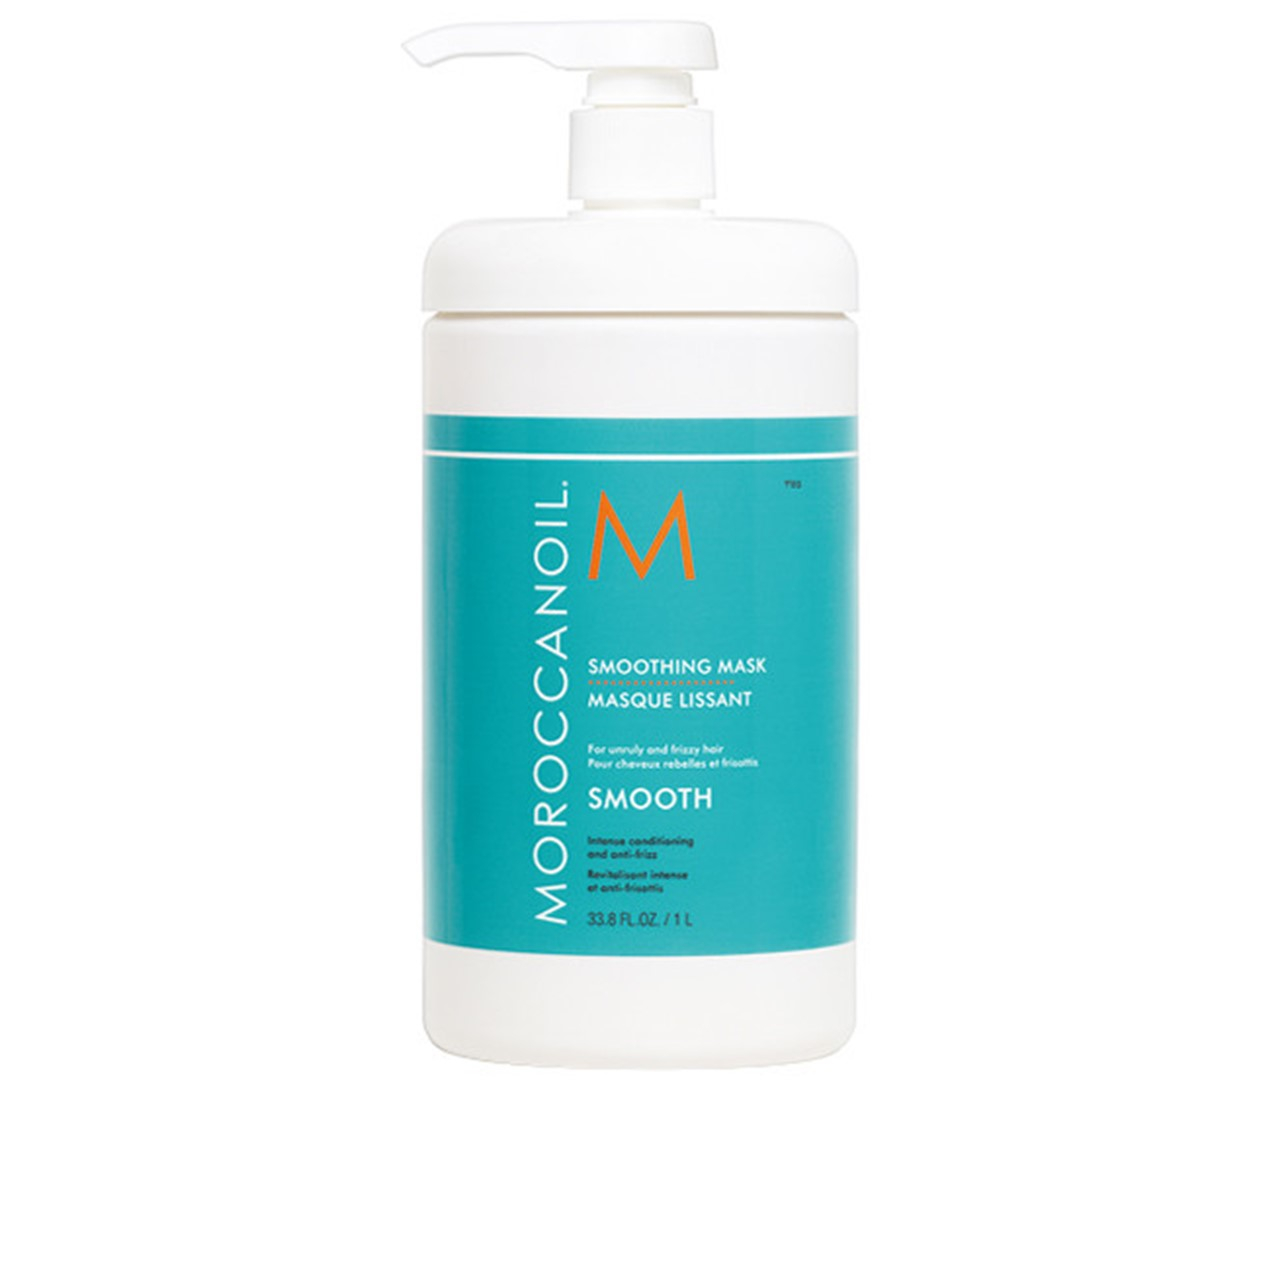 Moroccanoil Smoothing Mask 1L